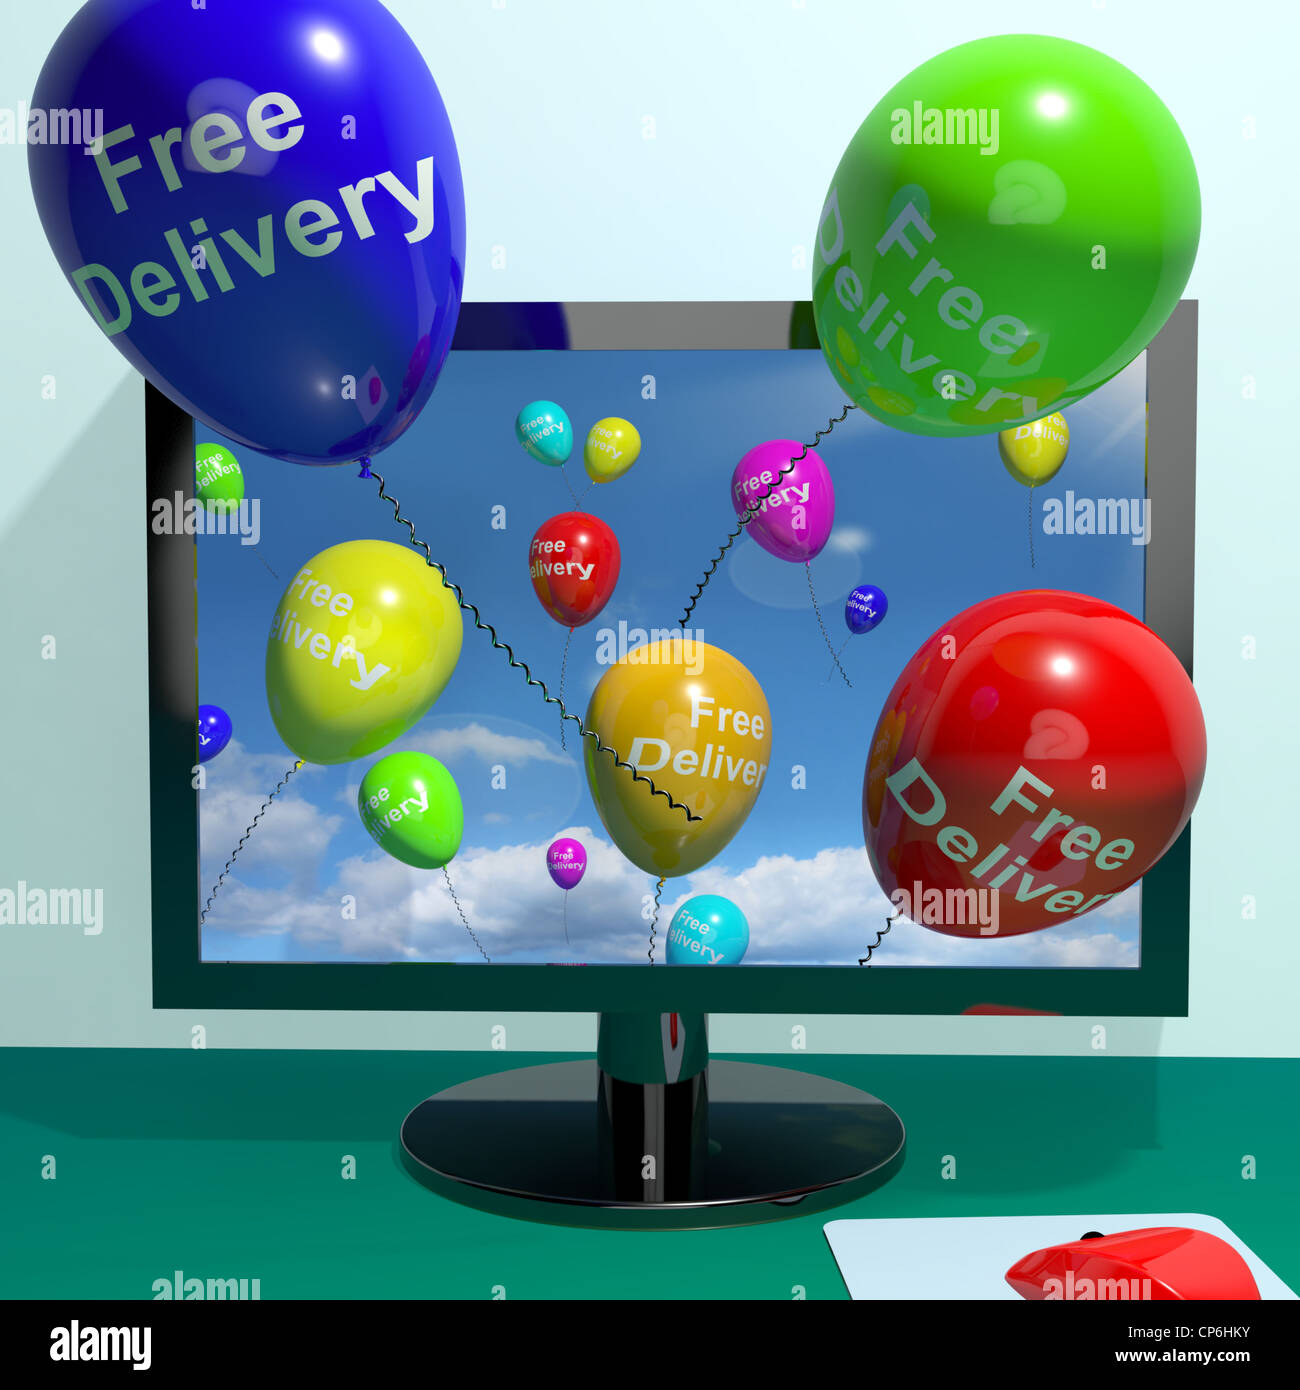 Free Delivery Balloons From Computer Shows No Charge Or Gratis To Deliver Stock Photo